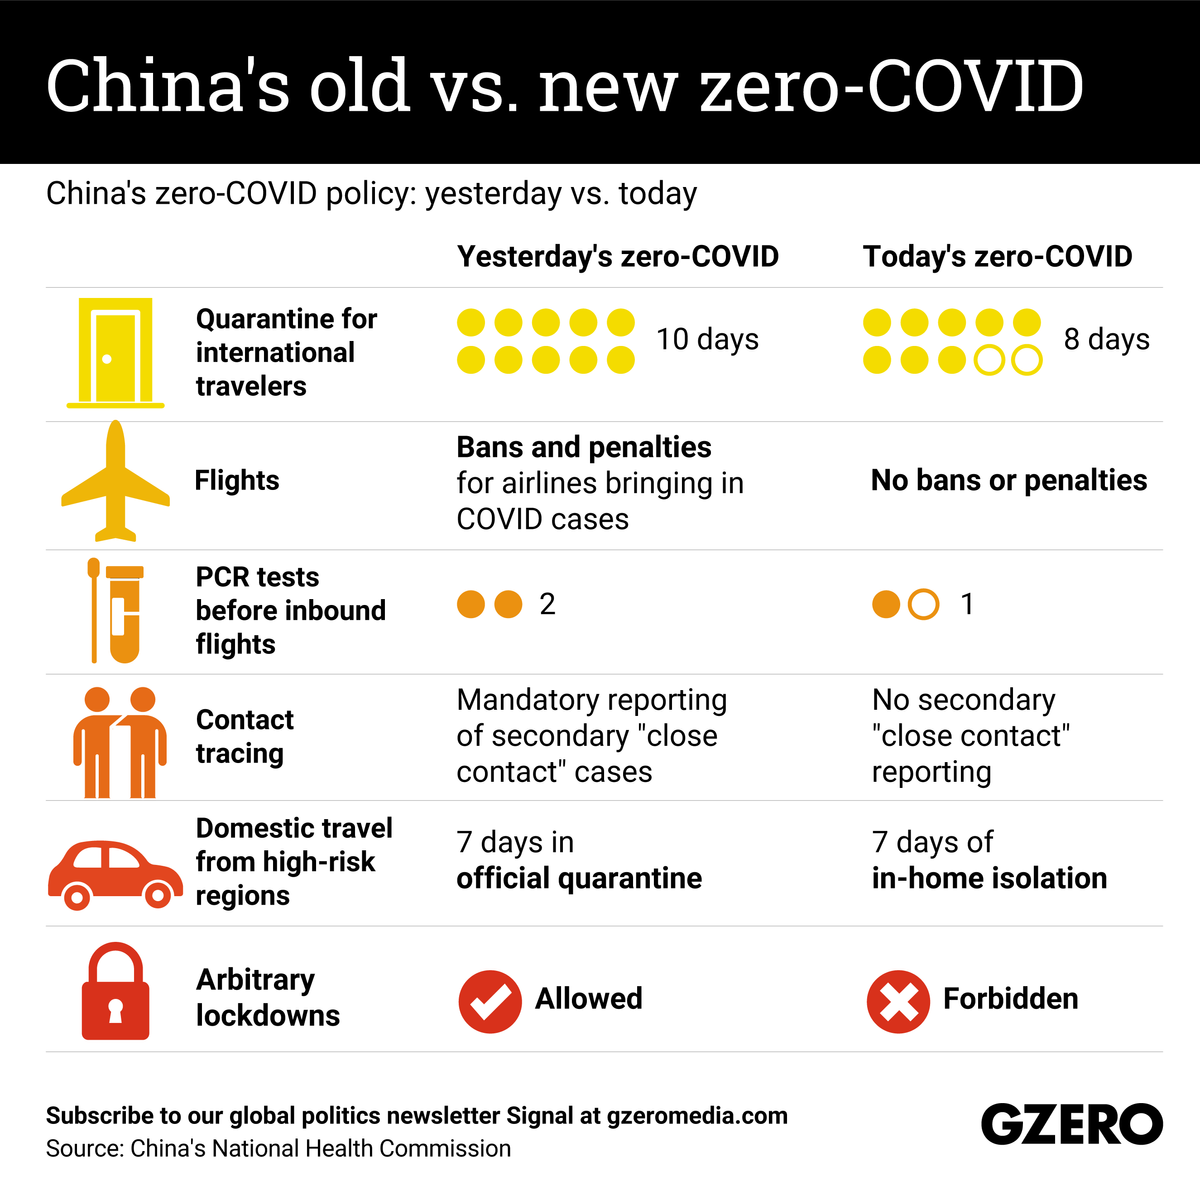 China eases zero-COVID restrictions